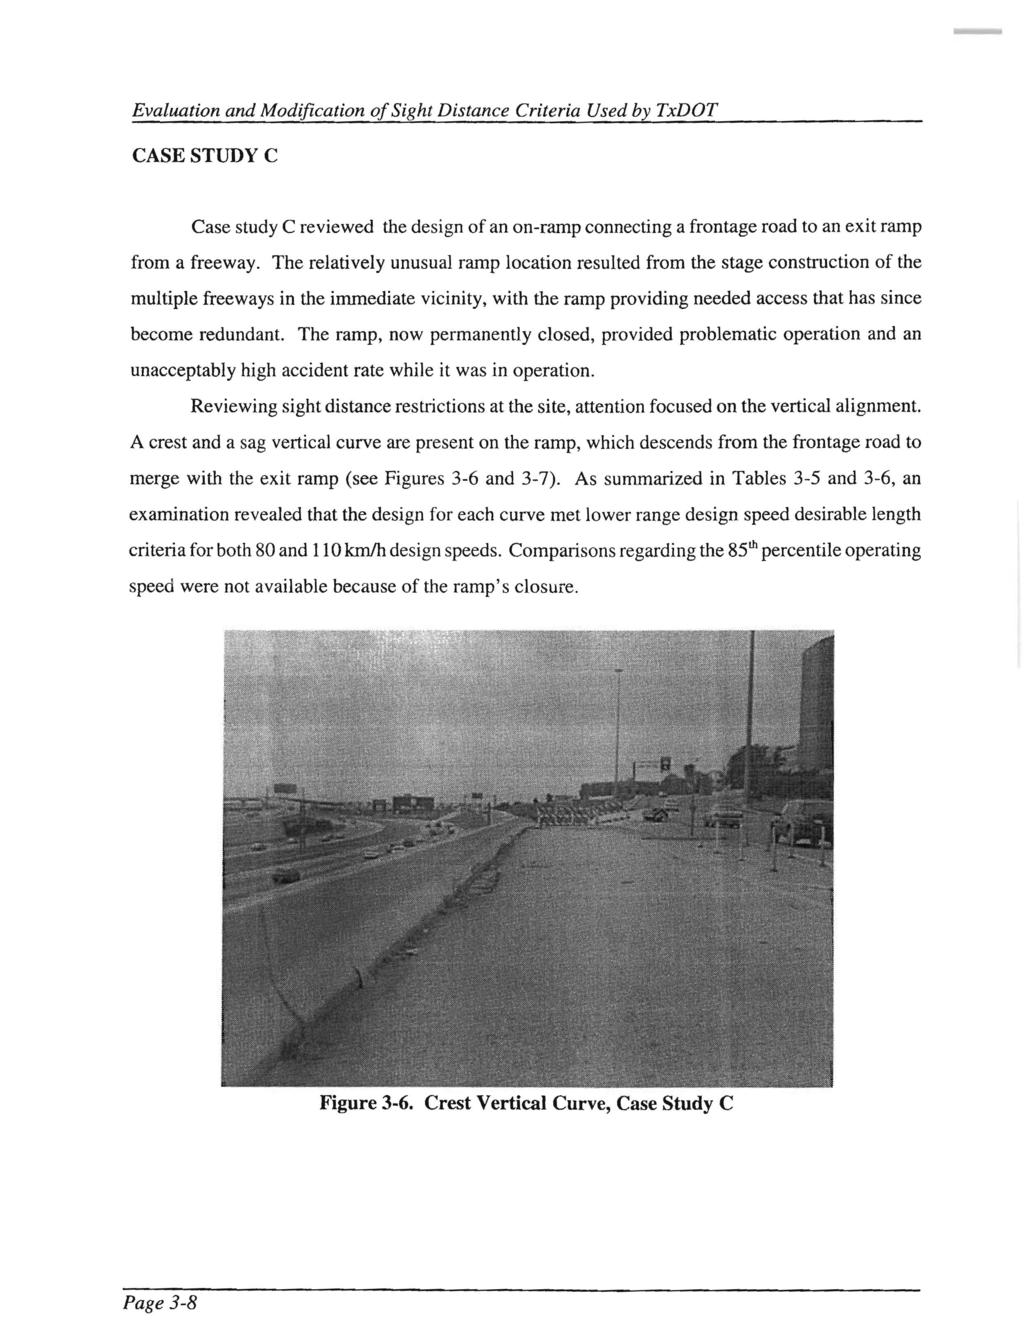 Evaluation and Modification of Sight Distance Criteria Used by TxDOT CASESTUDYC Case study C reviewed the design of an on-ramp connecting a frontage road to an exit ramp from a freeway.